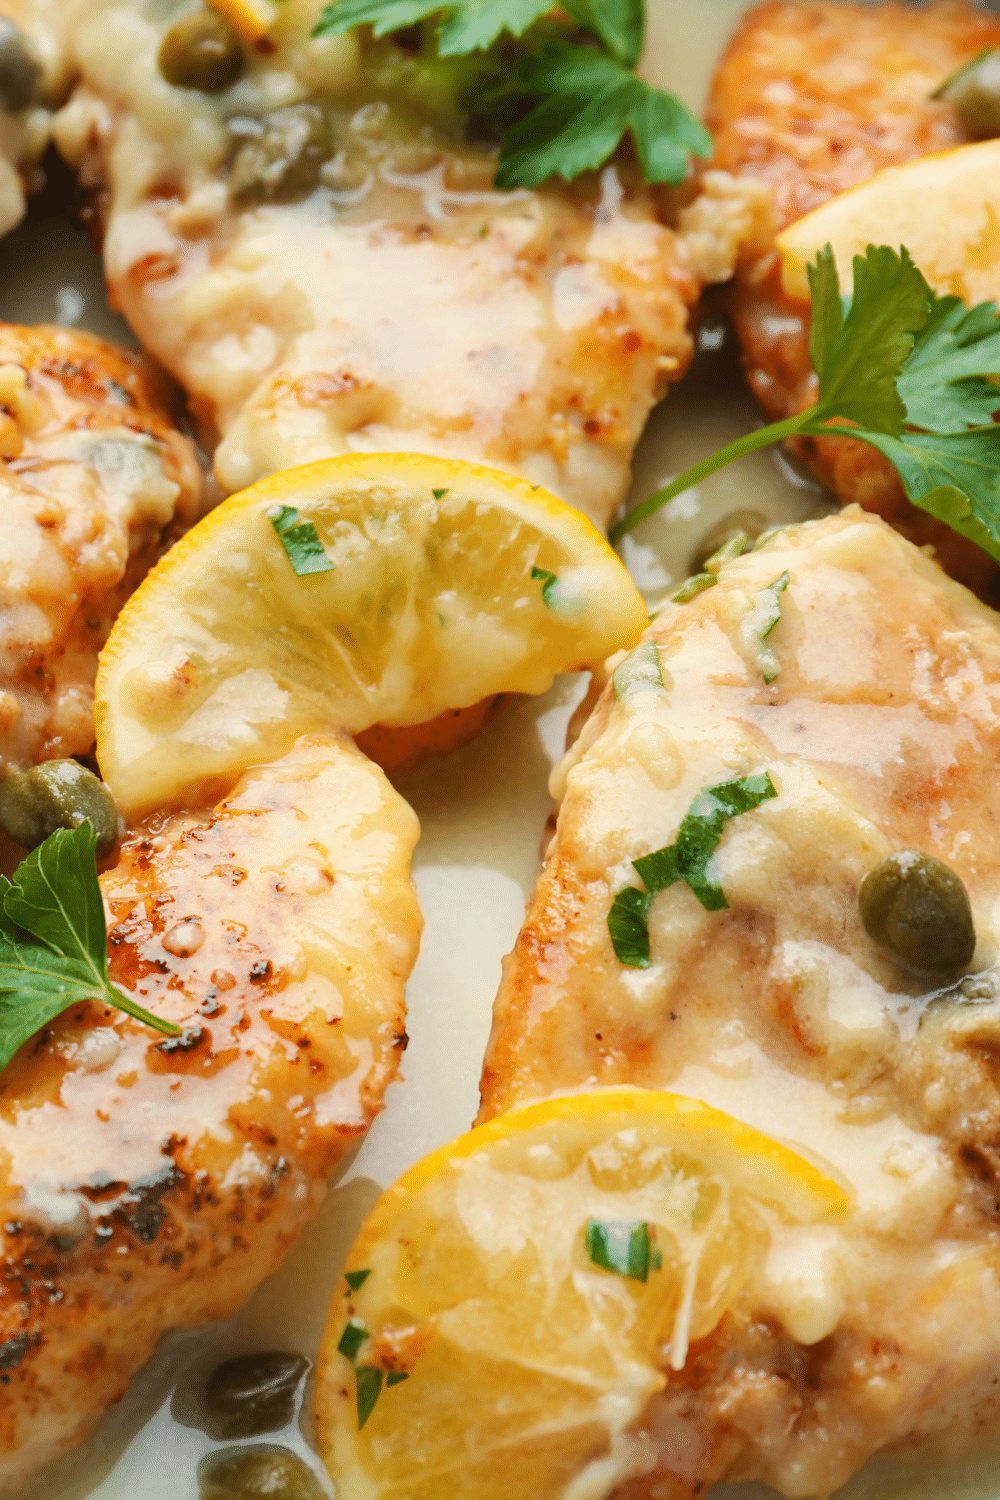 Lemon Chicken Casserole. Combined with tender chicken and zucchini, this dish is a fresh and vibrant option for any dinner.